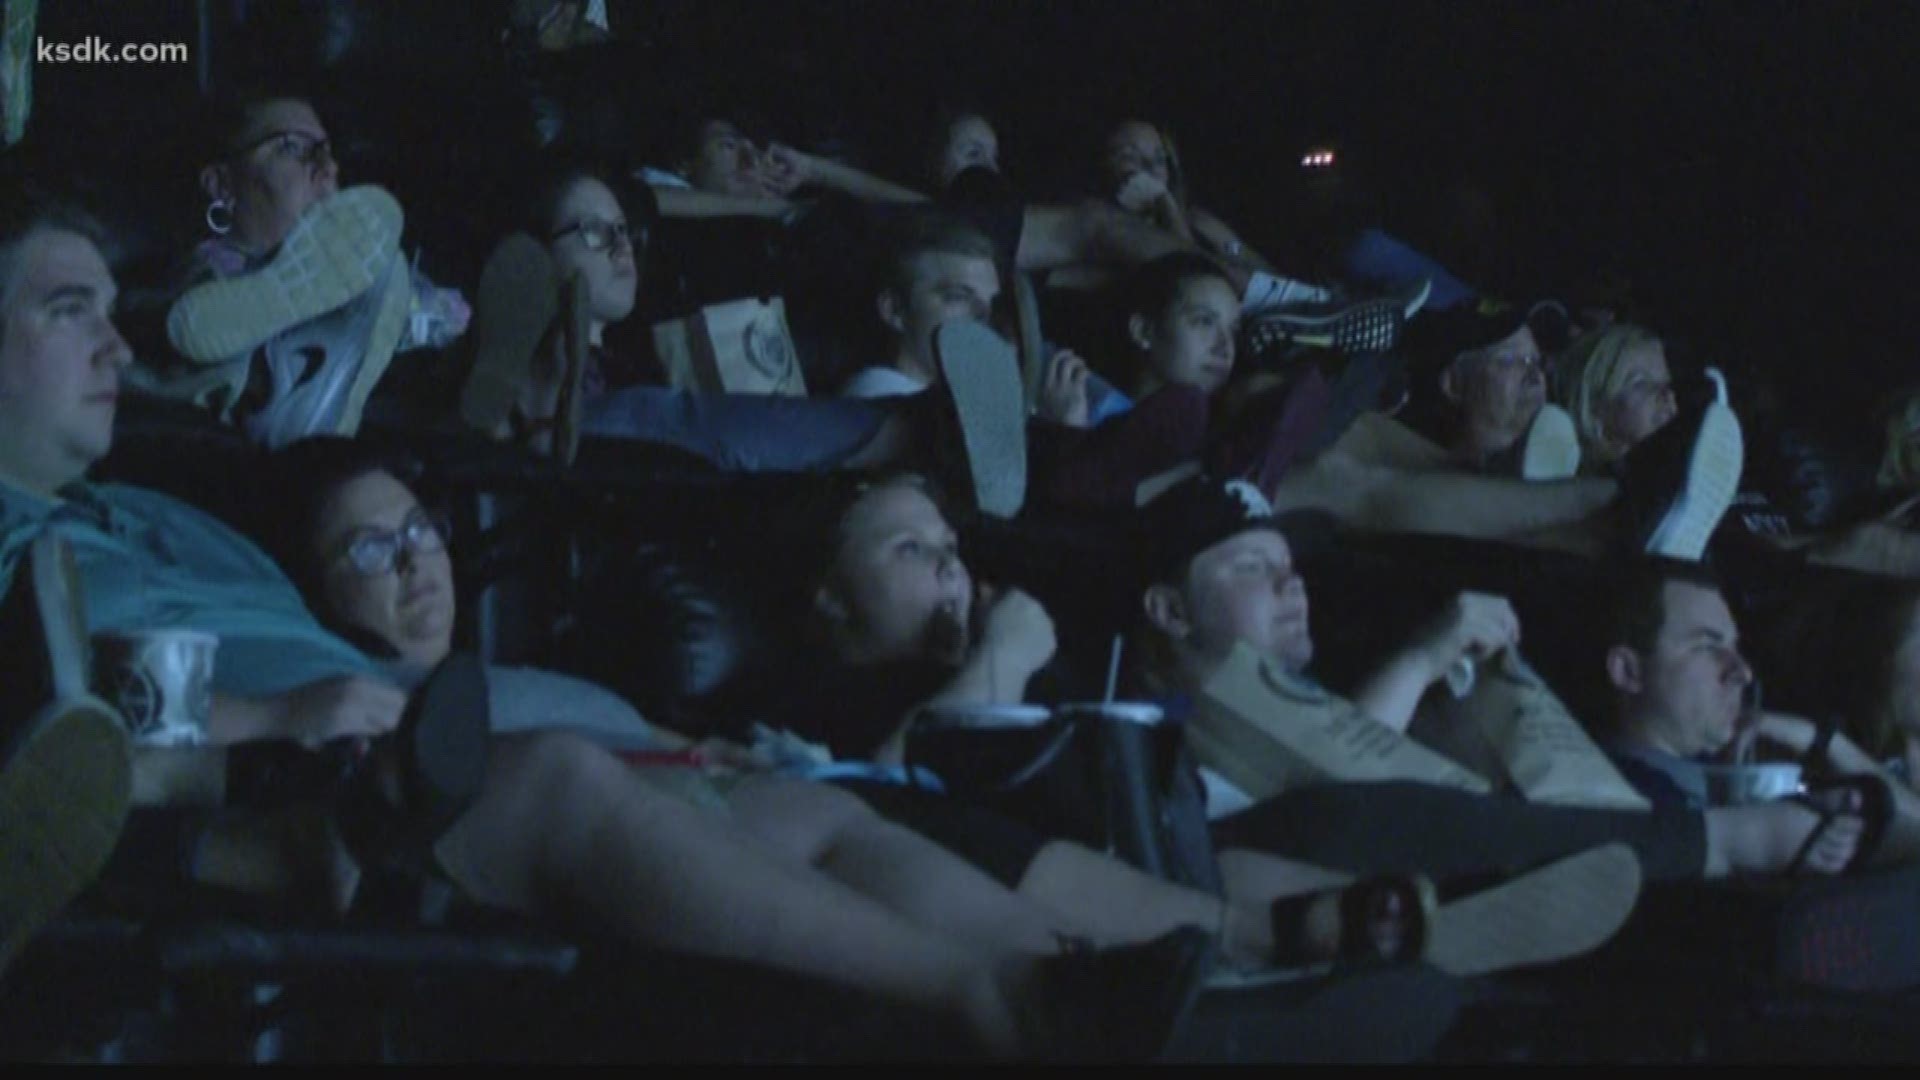 About 160 firefighters and their family members attended a private showing of "Breakthrough", as producers screened the new movie for some of the same people who lived through the rescue.